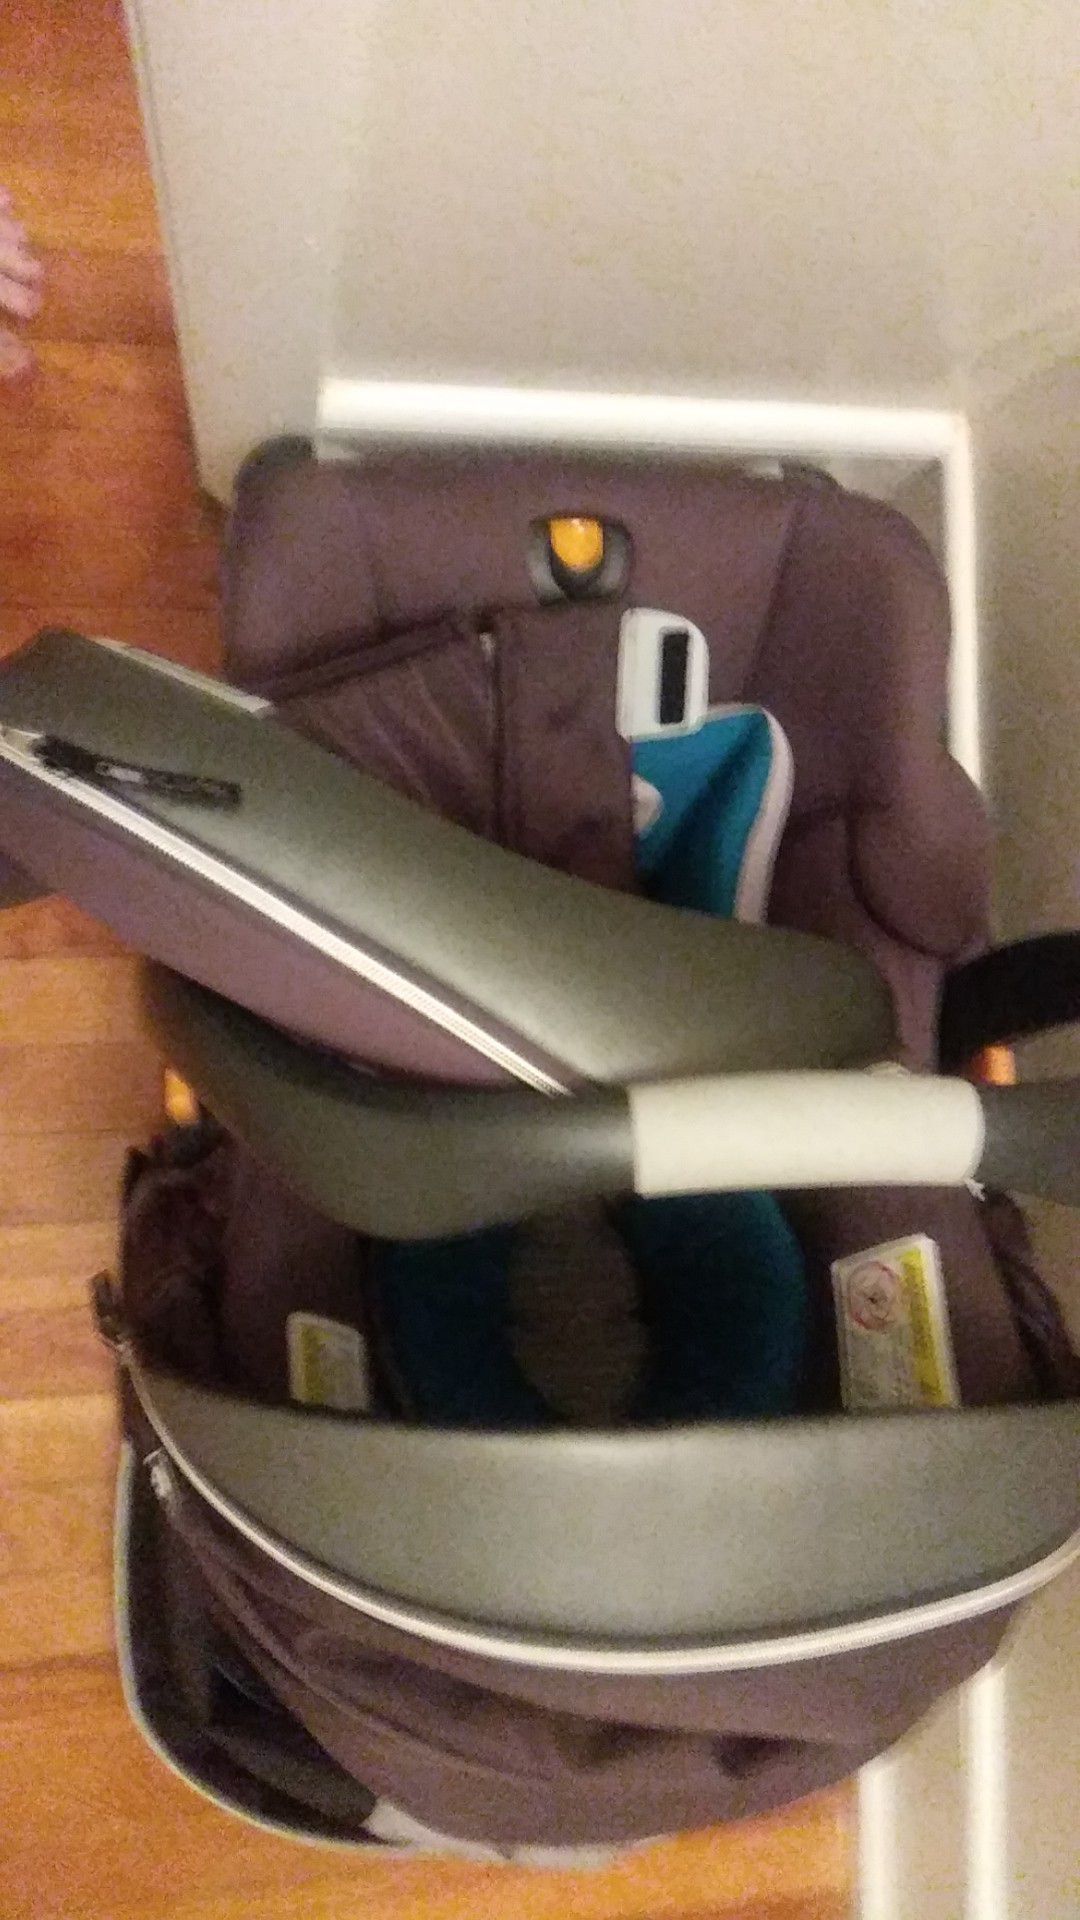 Car seat and stroller combo